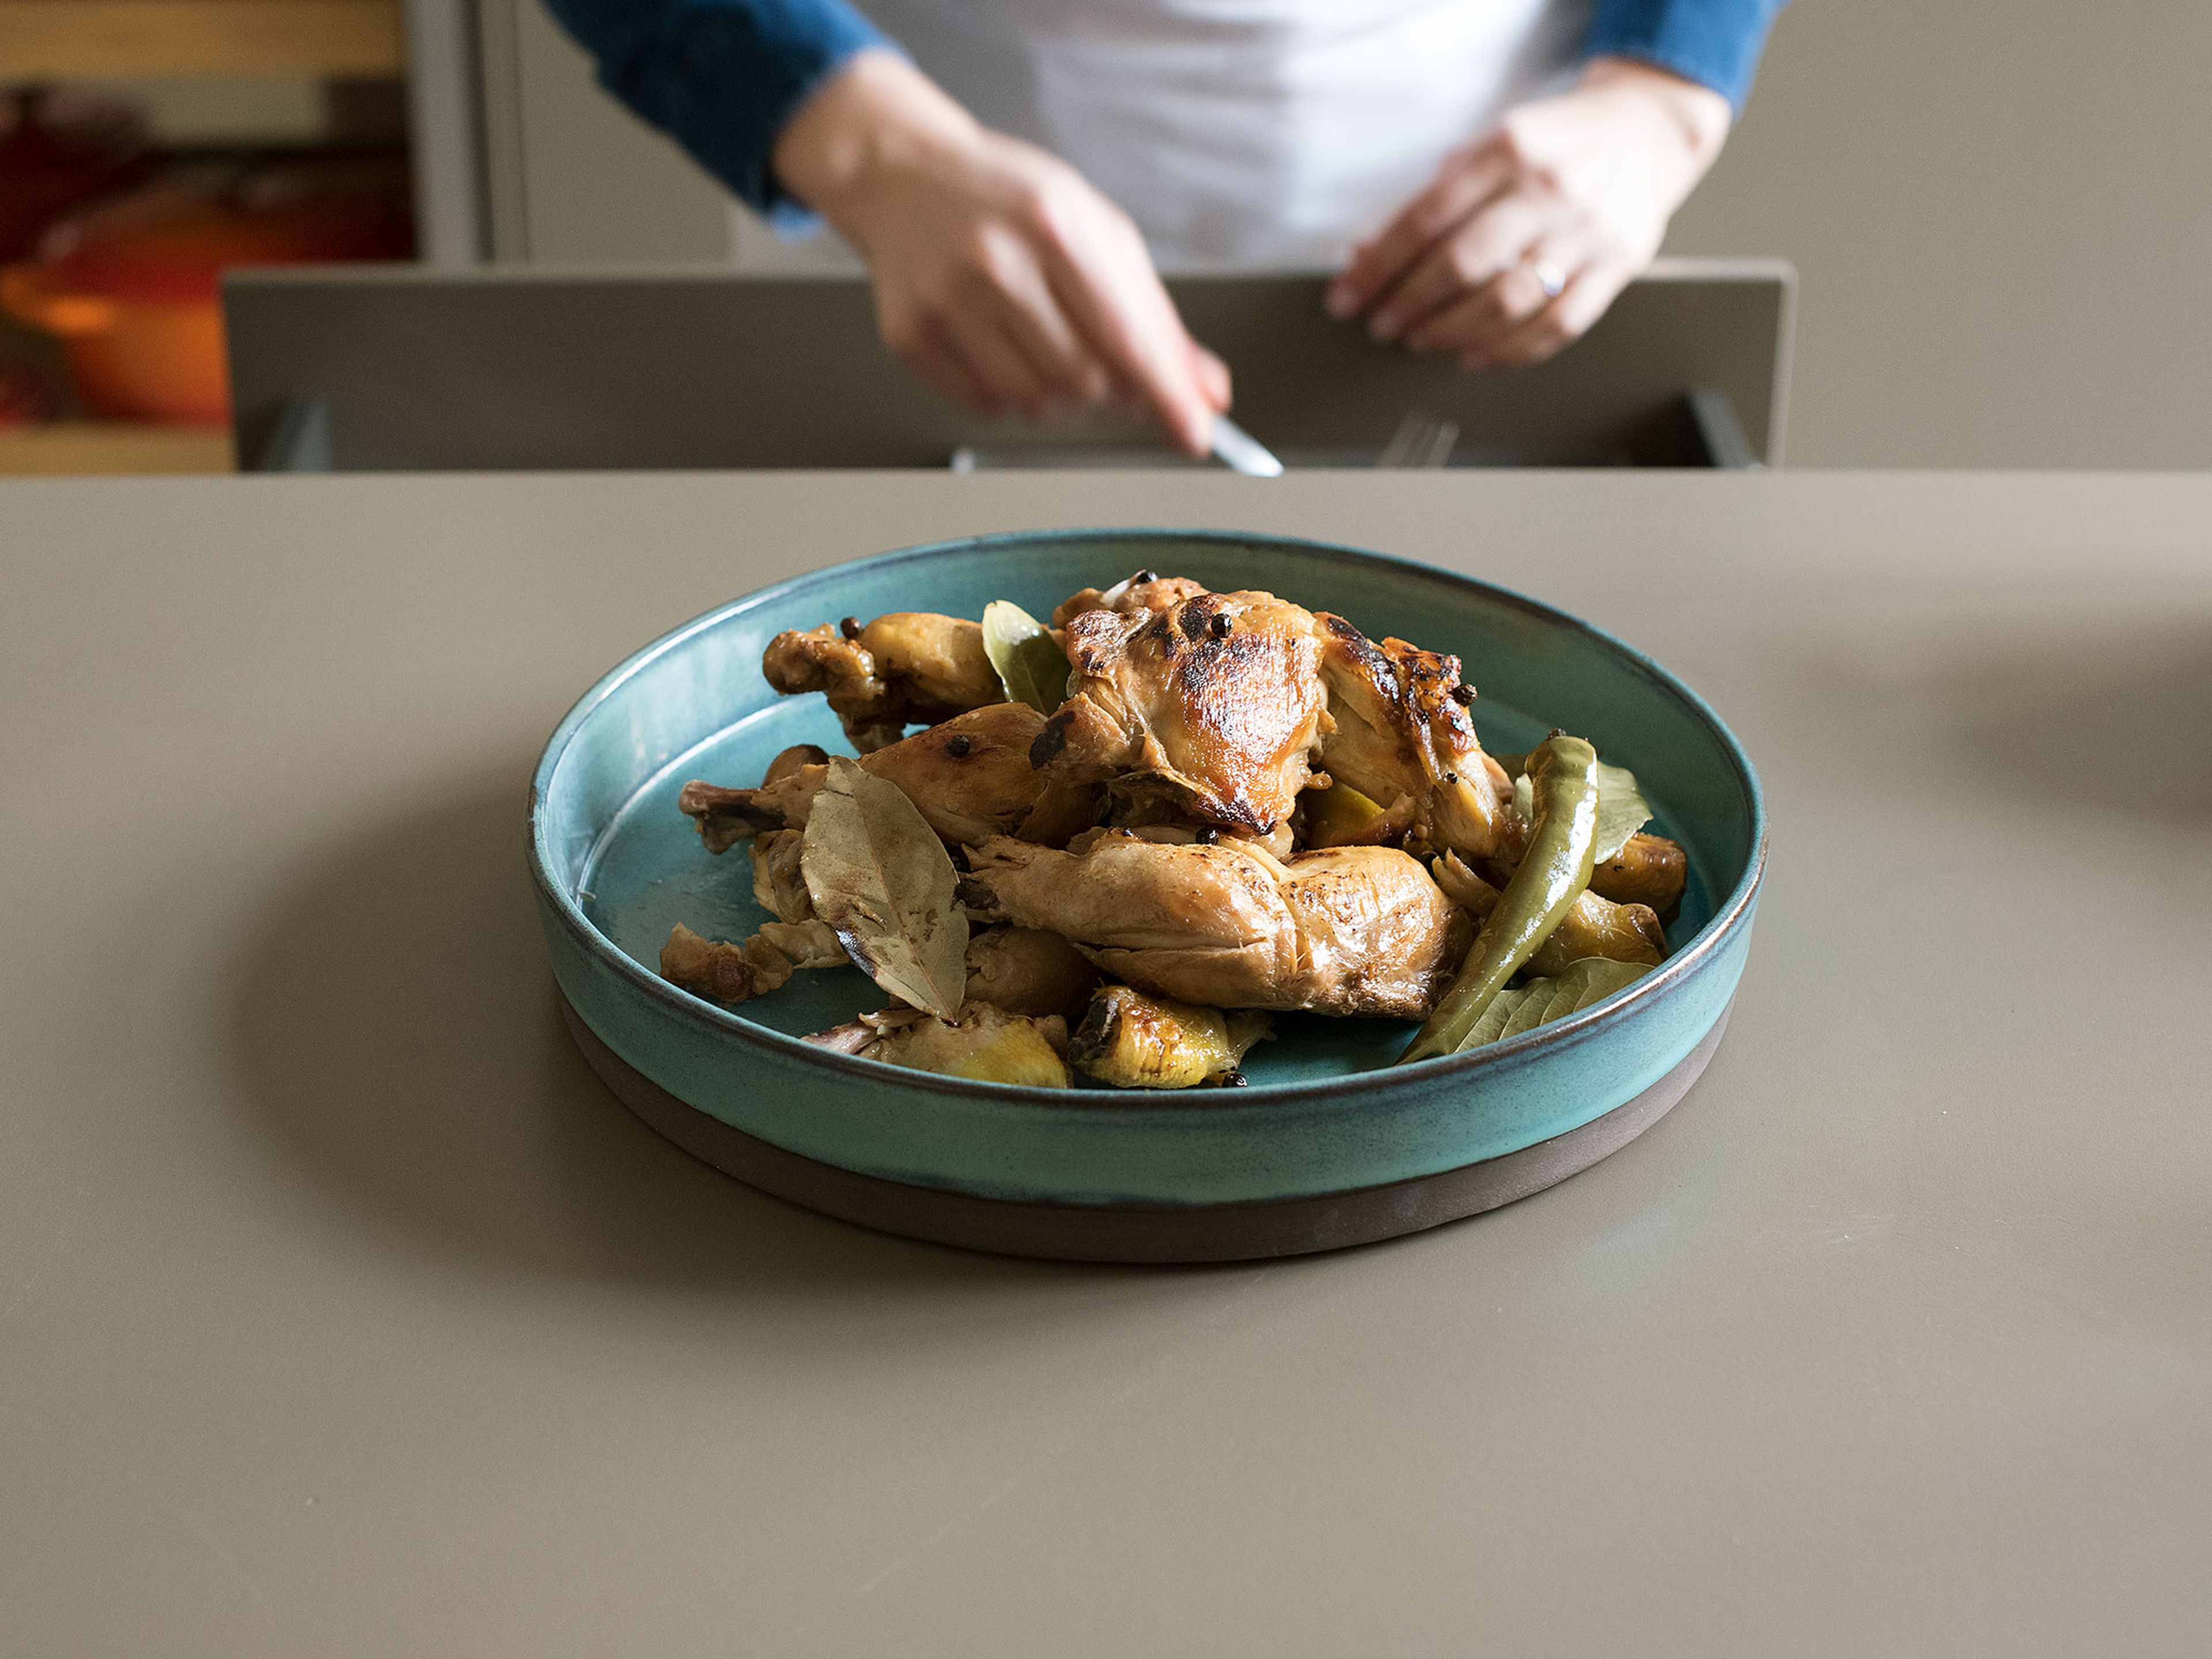 Put lid on slow cooker and cook on high for 2 – 3 hrs. or low for 4 – 5 hrs., until chicken is tender. Remove chicken with slotted spoon and place on serving platter; cover to keep warm.